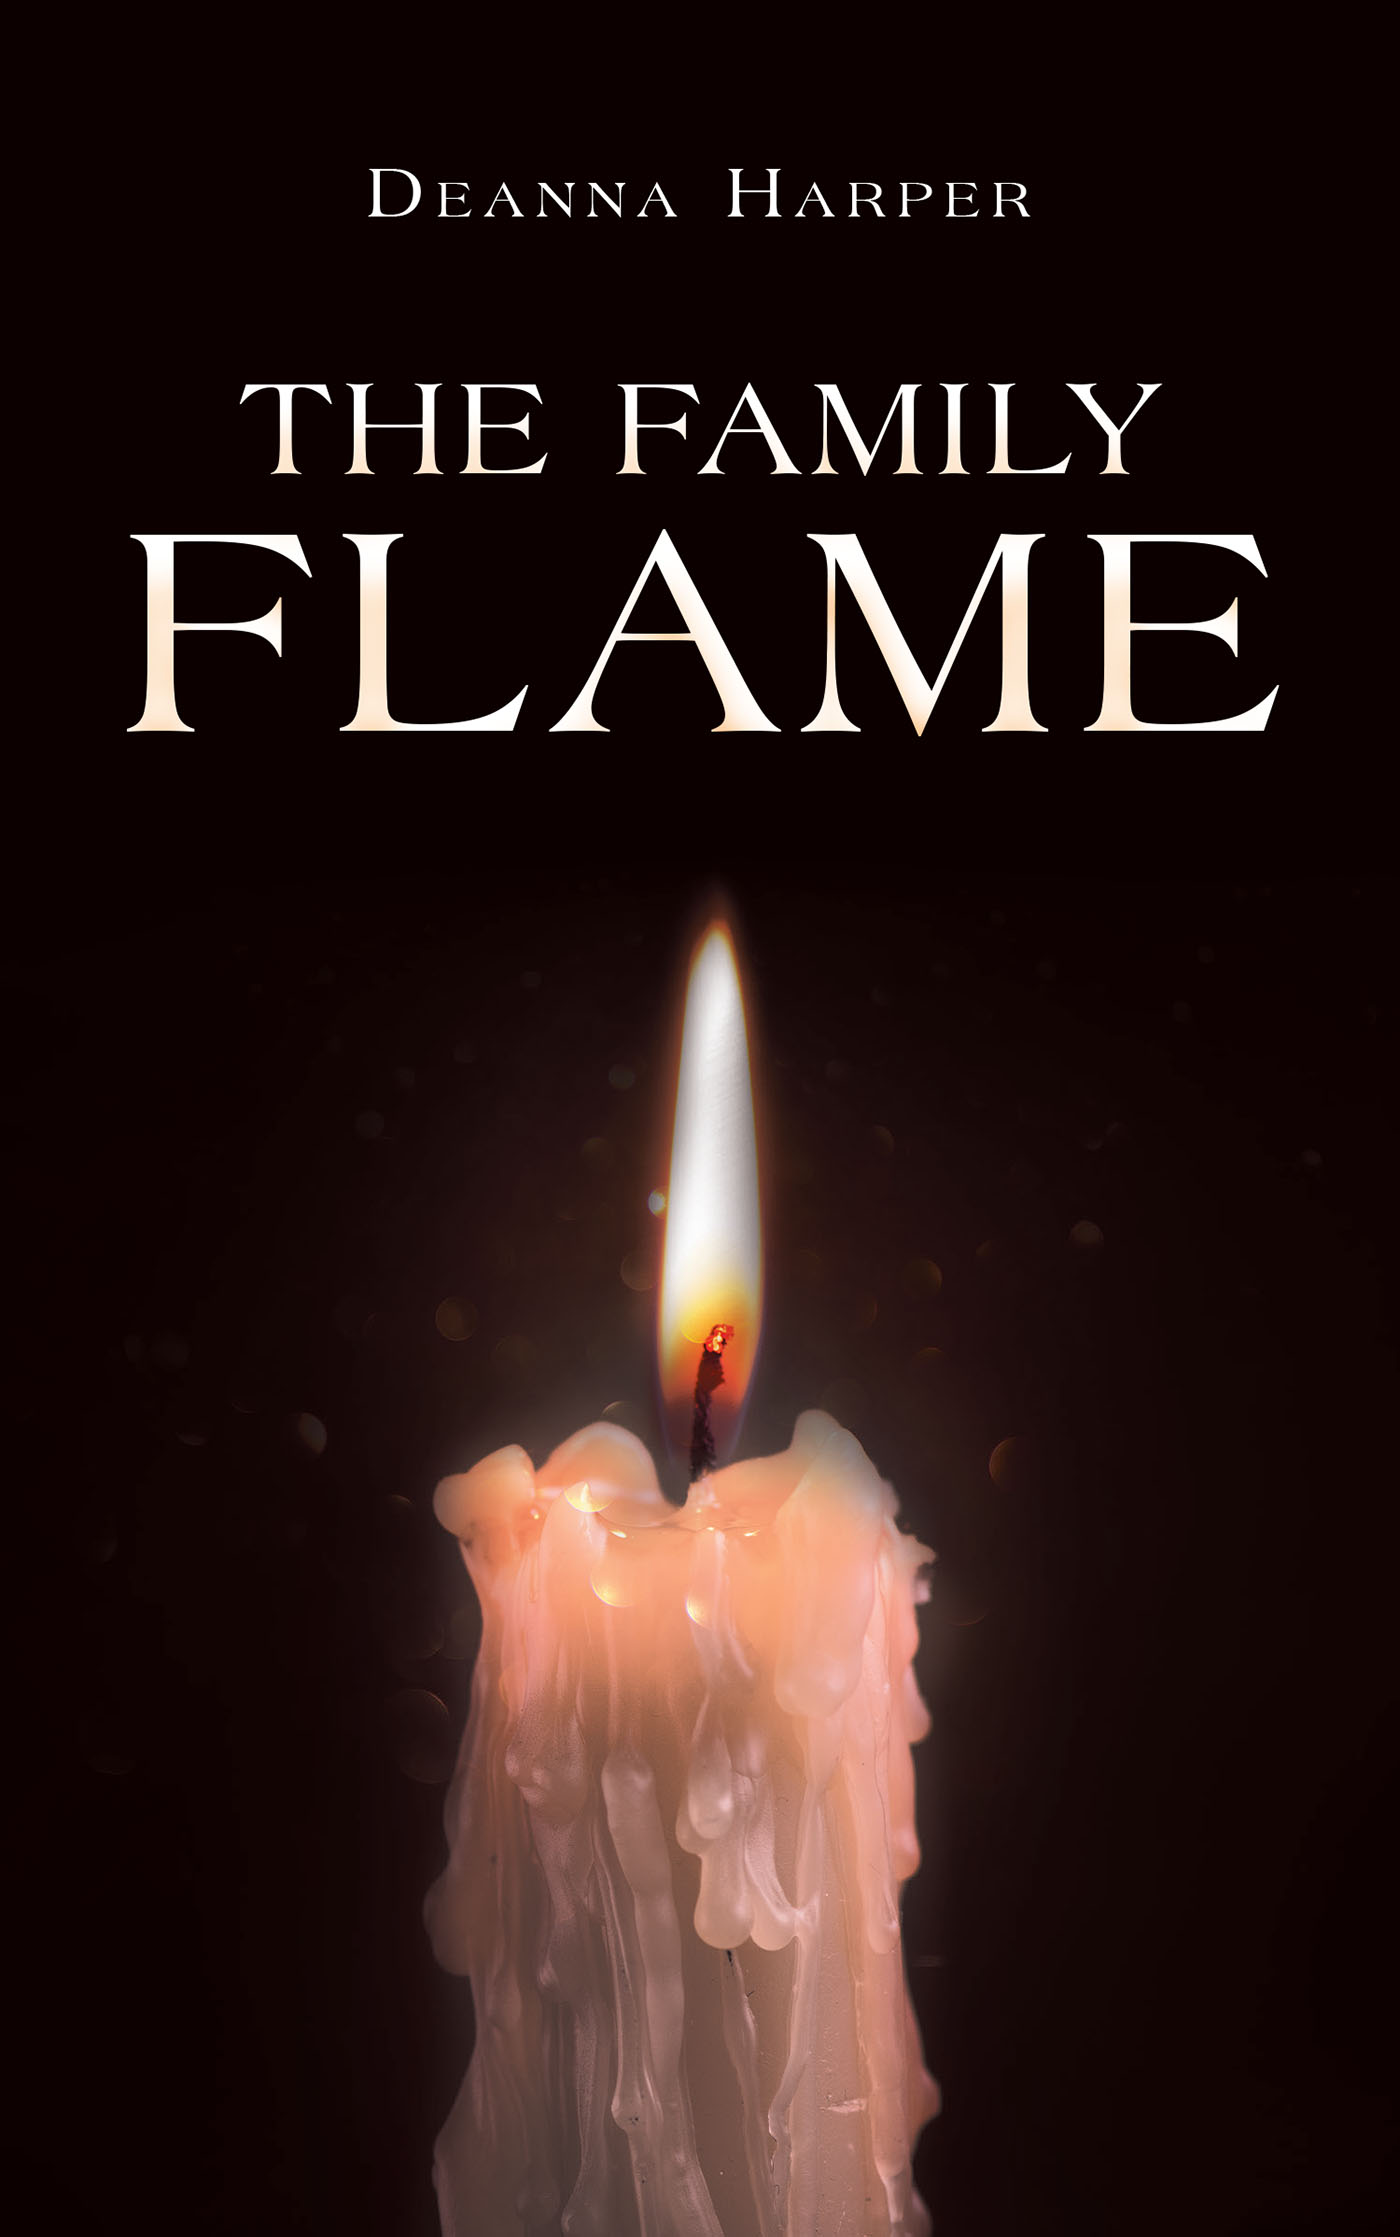 Deanna Harper’s Newly Released "The Family Flame" is a Powerful Story of Coping with Mental Illness and Overcoming Life’s Roadblocks